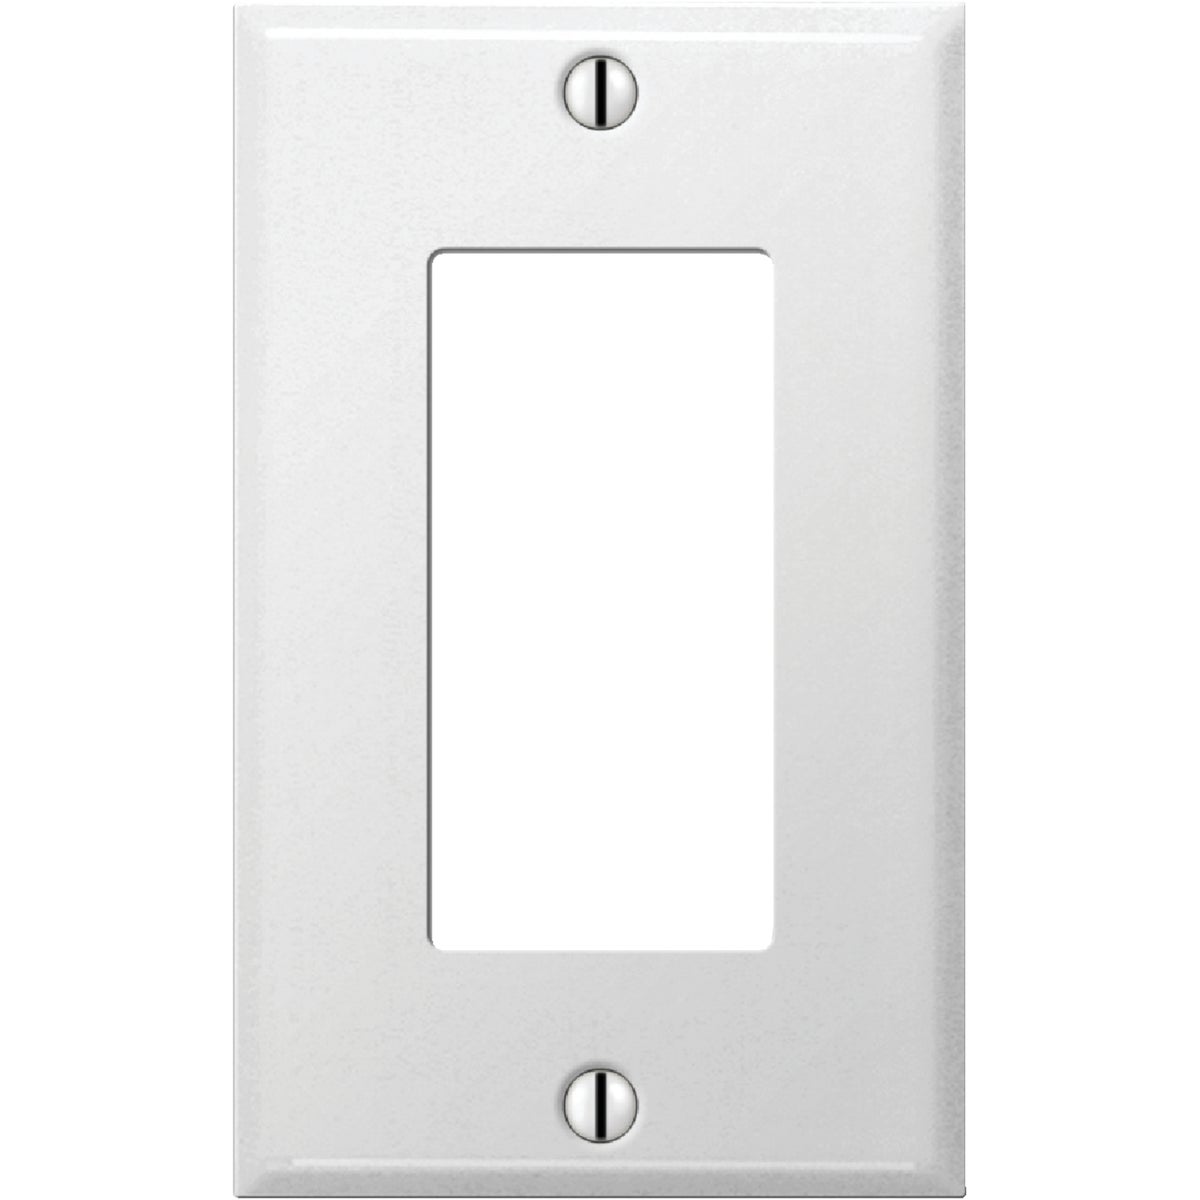 Item 551465, Stamped steel rocker GFCI (ground fault circuit interrupter) wall plate.